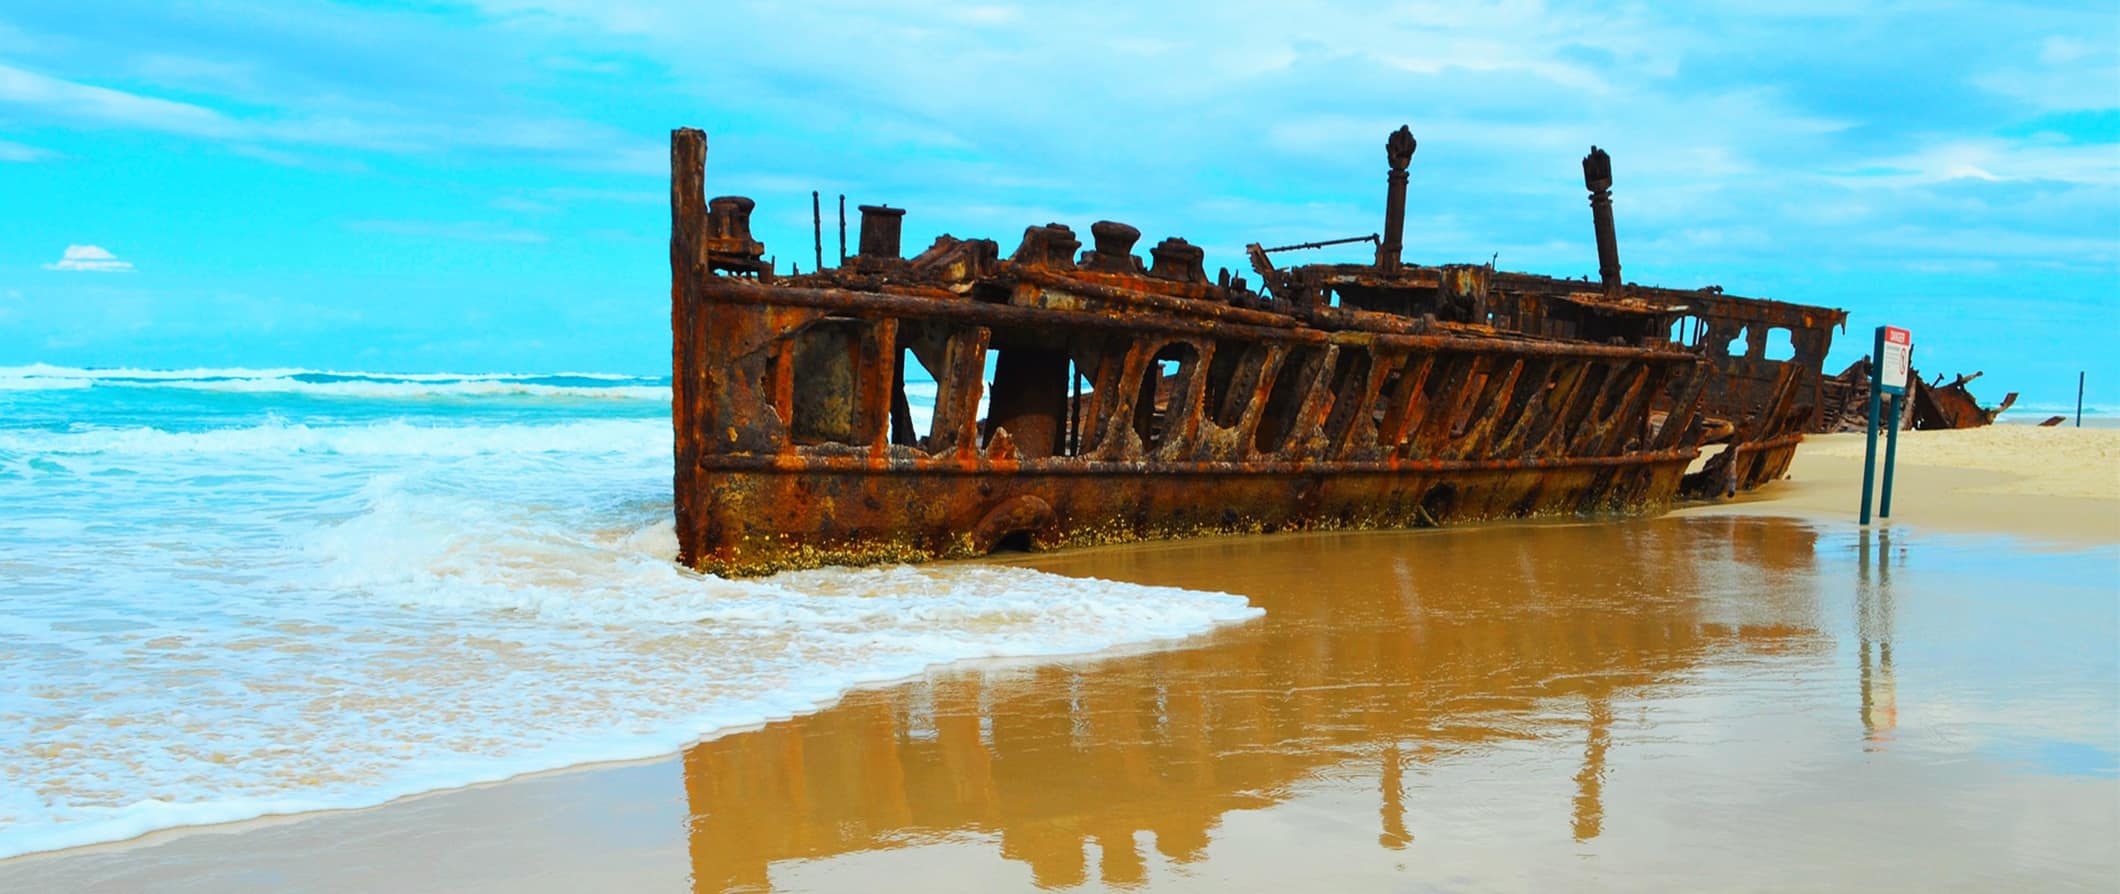 A famous rusted out 20th century shipwreck on the beach of Fraser Island in Australia